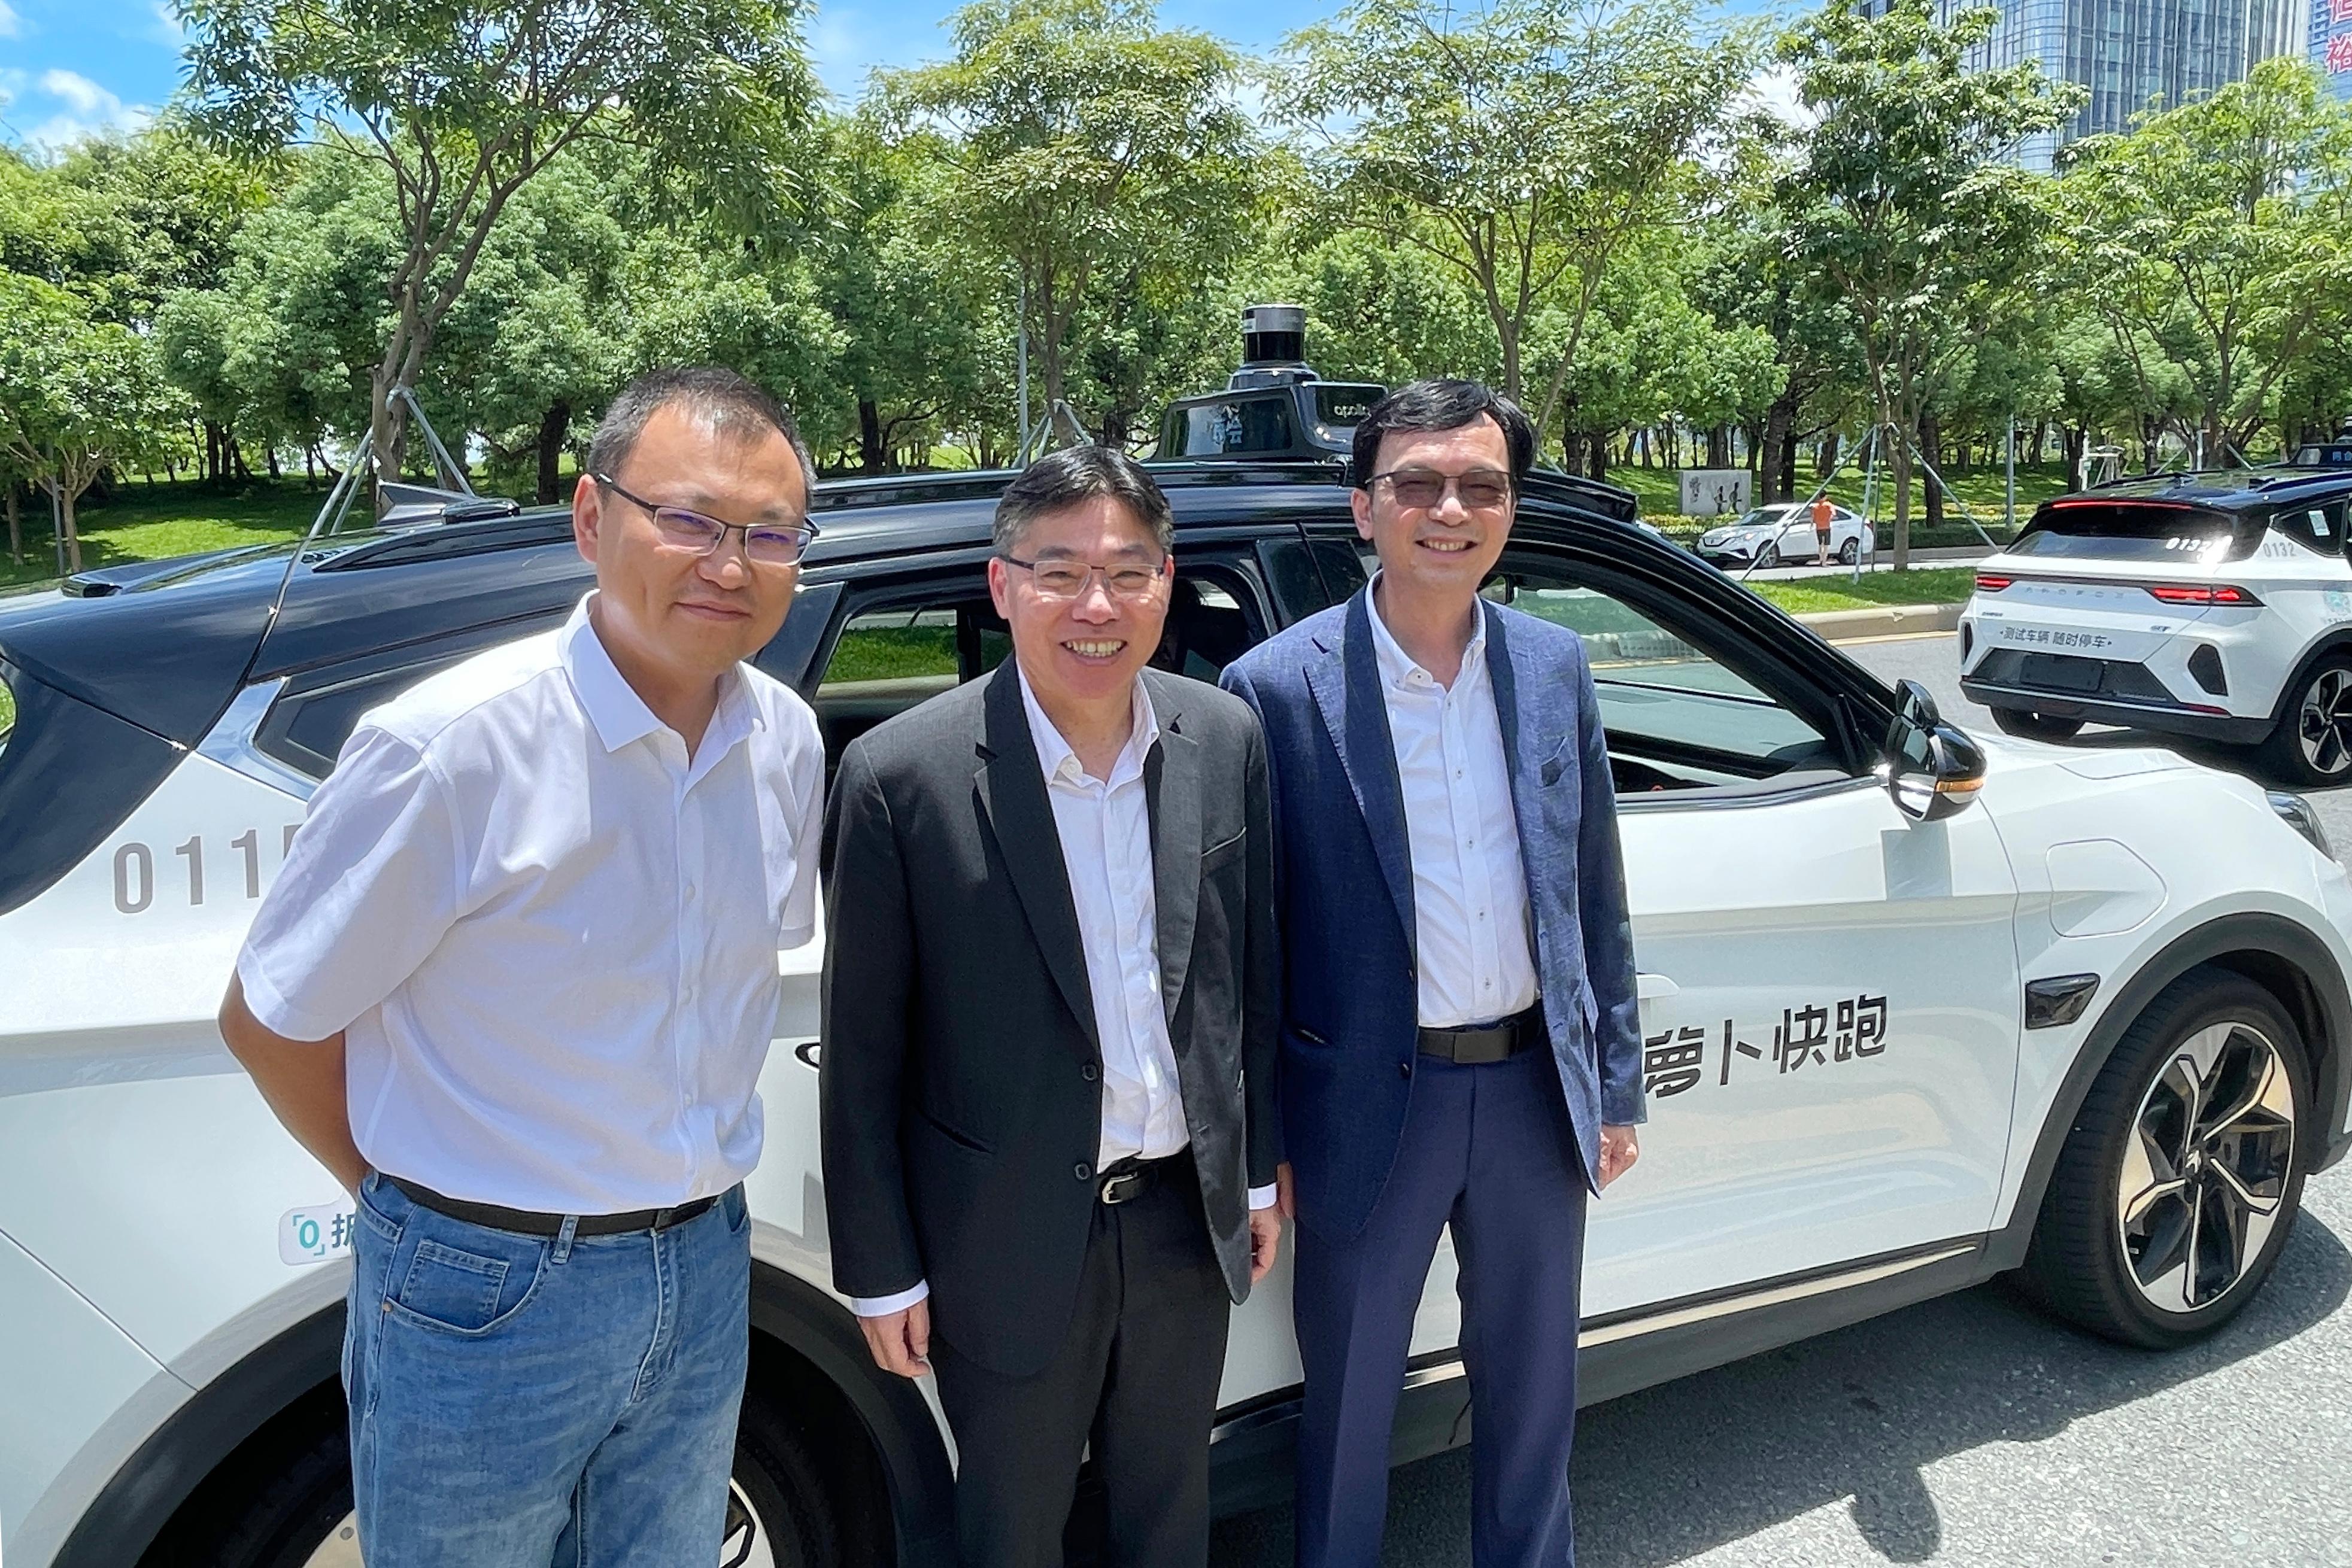 The Secretary for Transport and Logistics, Mr Lam Sai-hung, today (July 20) visited Baidu's headquarters in Shenzhen, where he was briefed by company representatives on Baidu's autonomous driving travel service platform, Apollo Go. Mr Lam (centre) and the Under Secretary for Transport and Logistics, Mr Liu Chun-san (right), are pictured with Vice President of Baidu Mr Shi Qinghua (left) before taking a test ride in an Apollo Go autonomous vehicle.